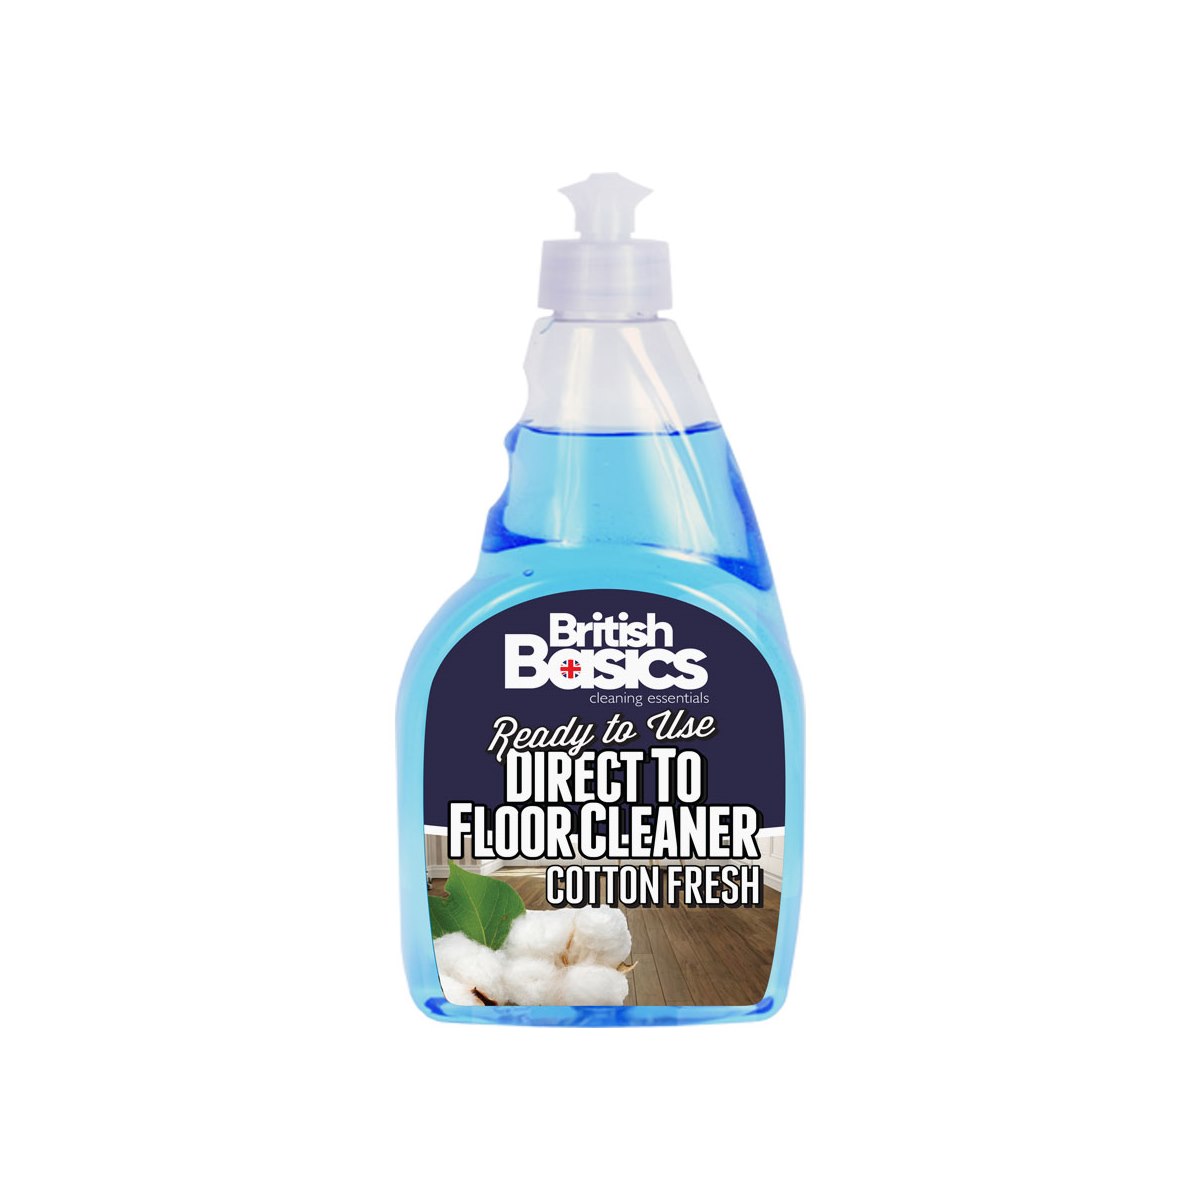 British Basics Ready To use Direct To Floor Cleaner Cotton Fresh 500ml